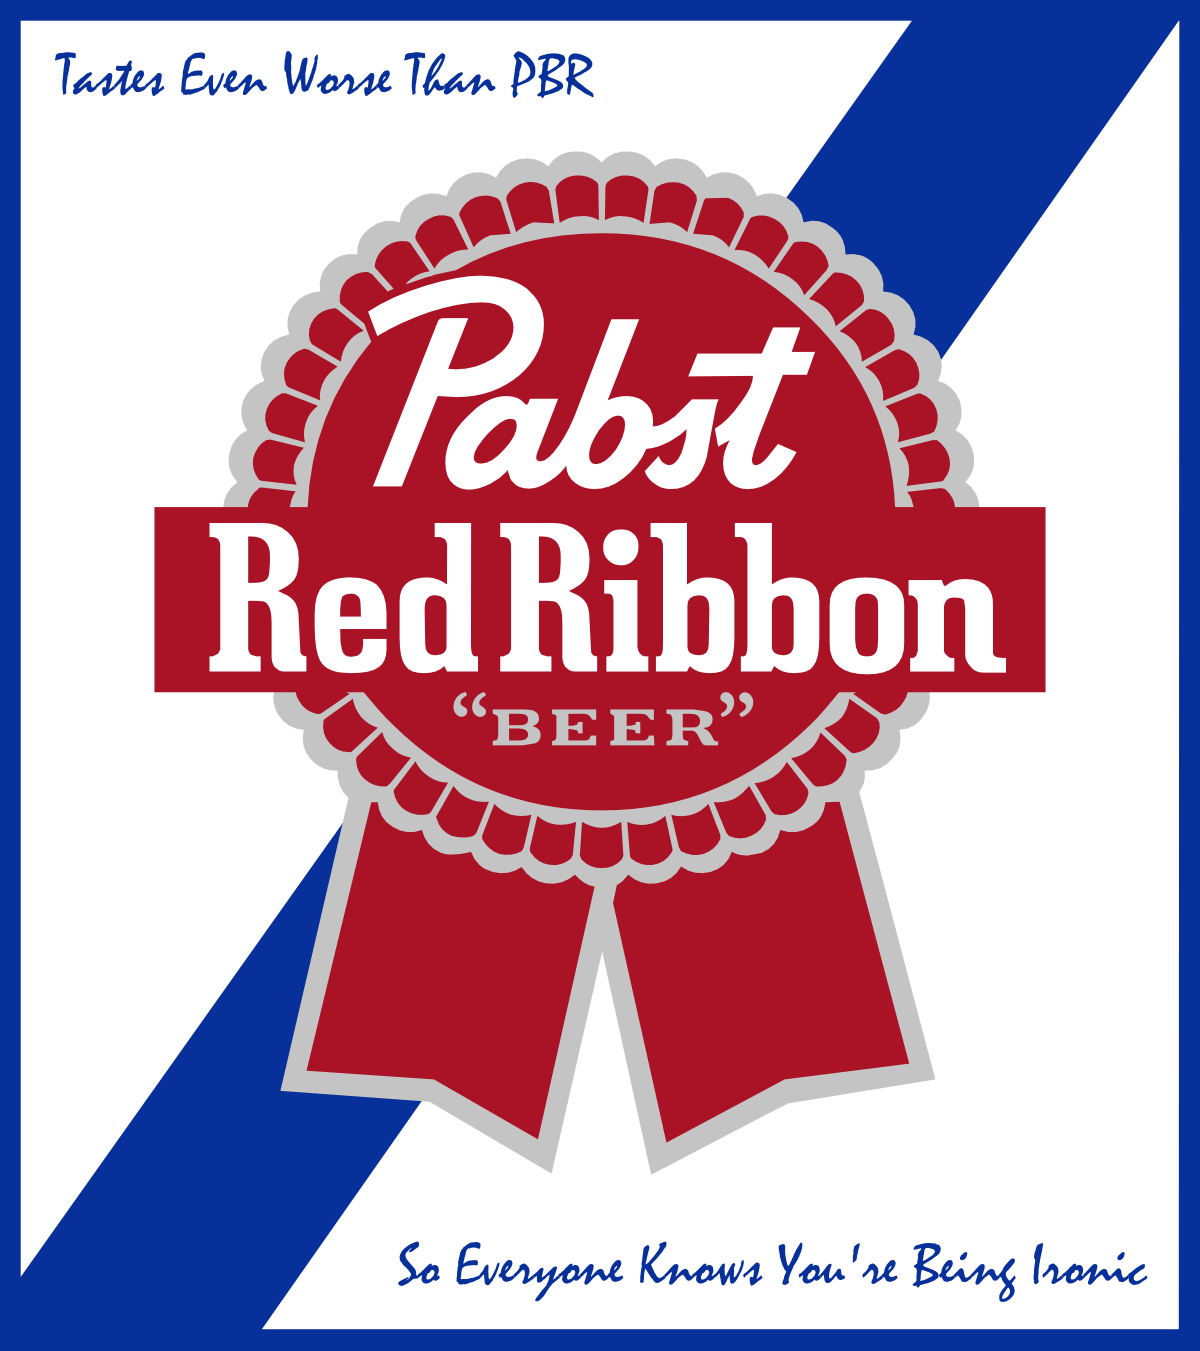 Red and Blue Ribbon Logo - Things Nobody Cares About